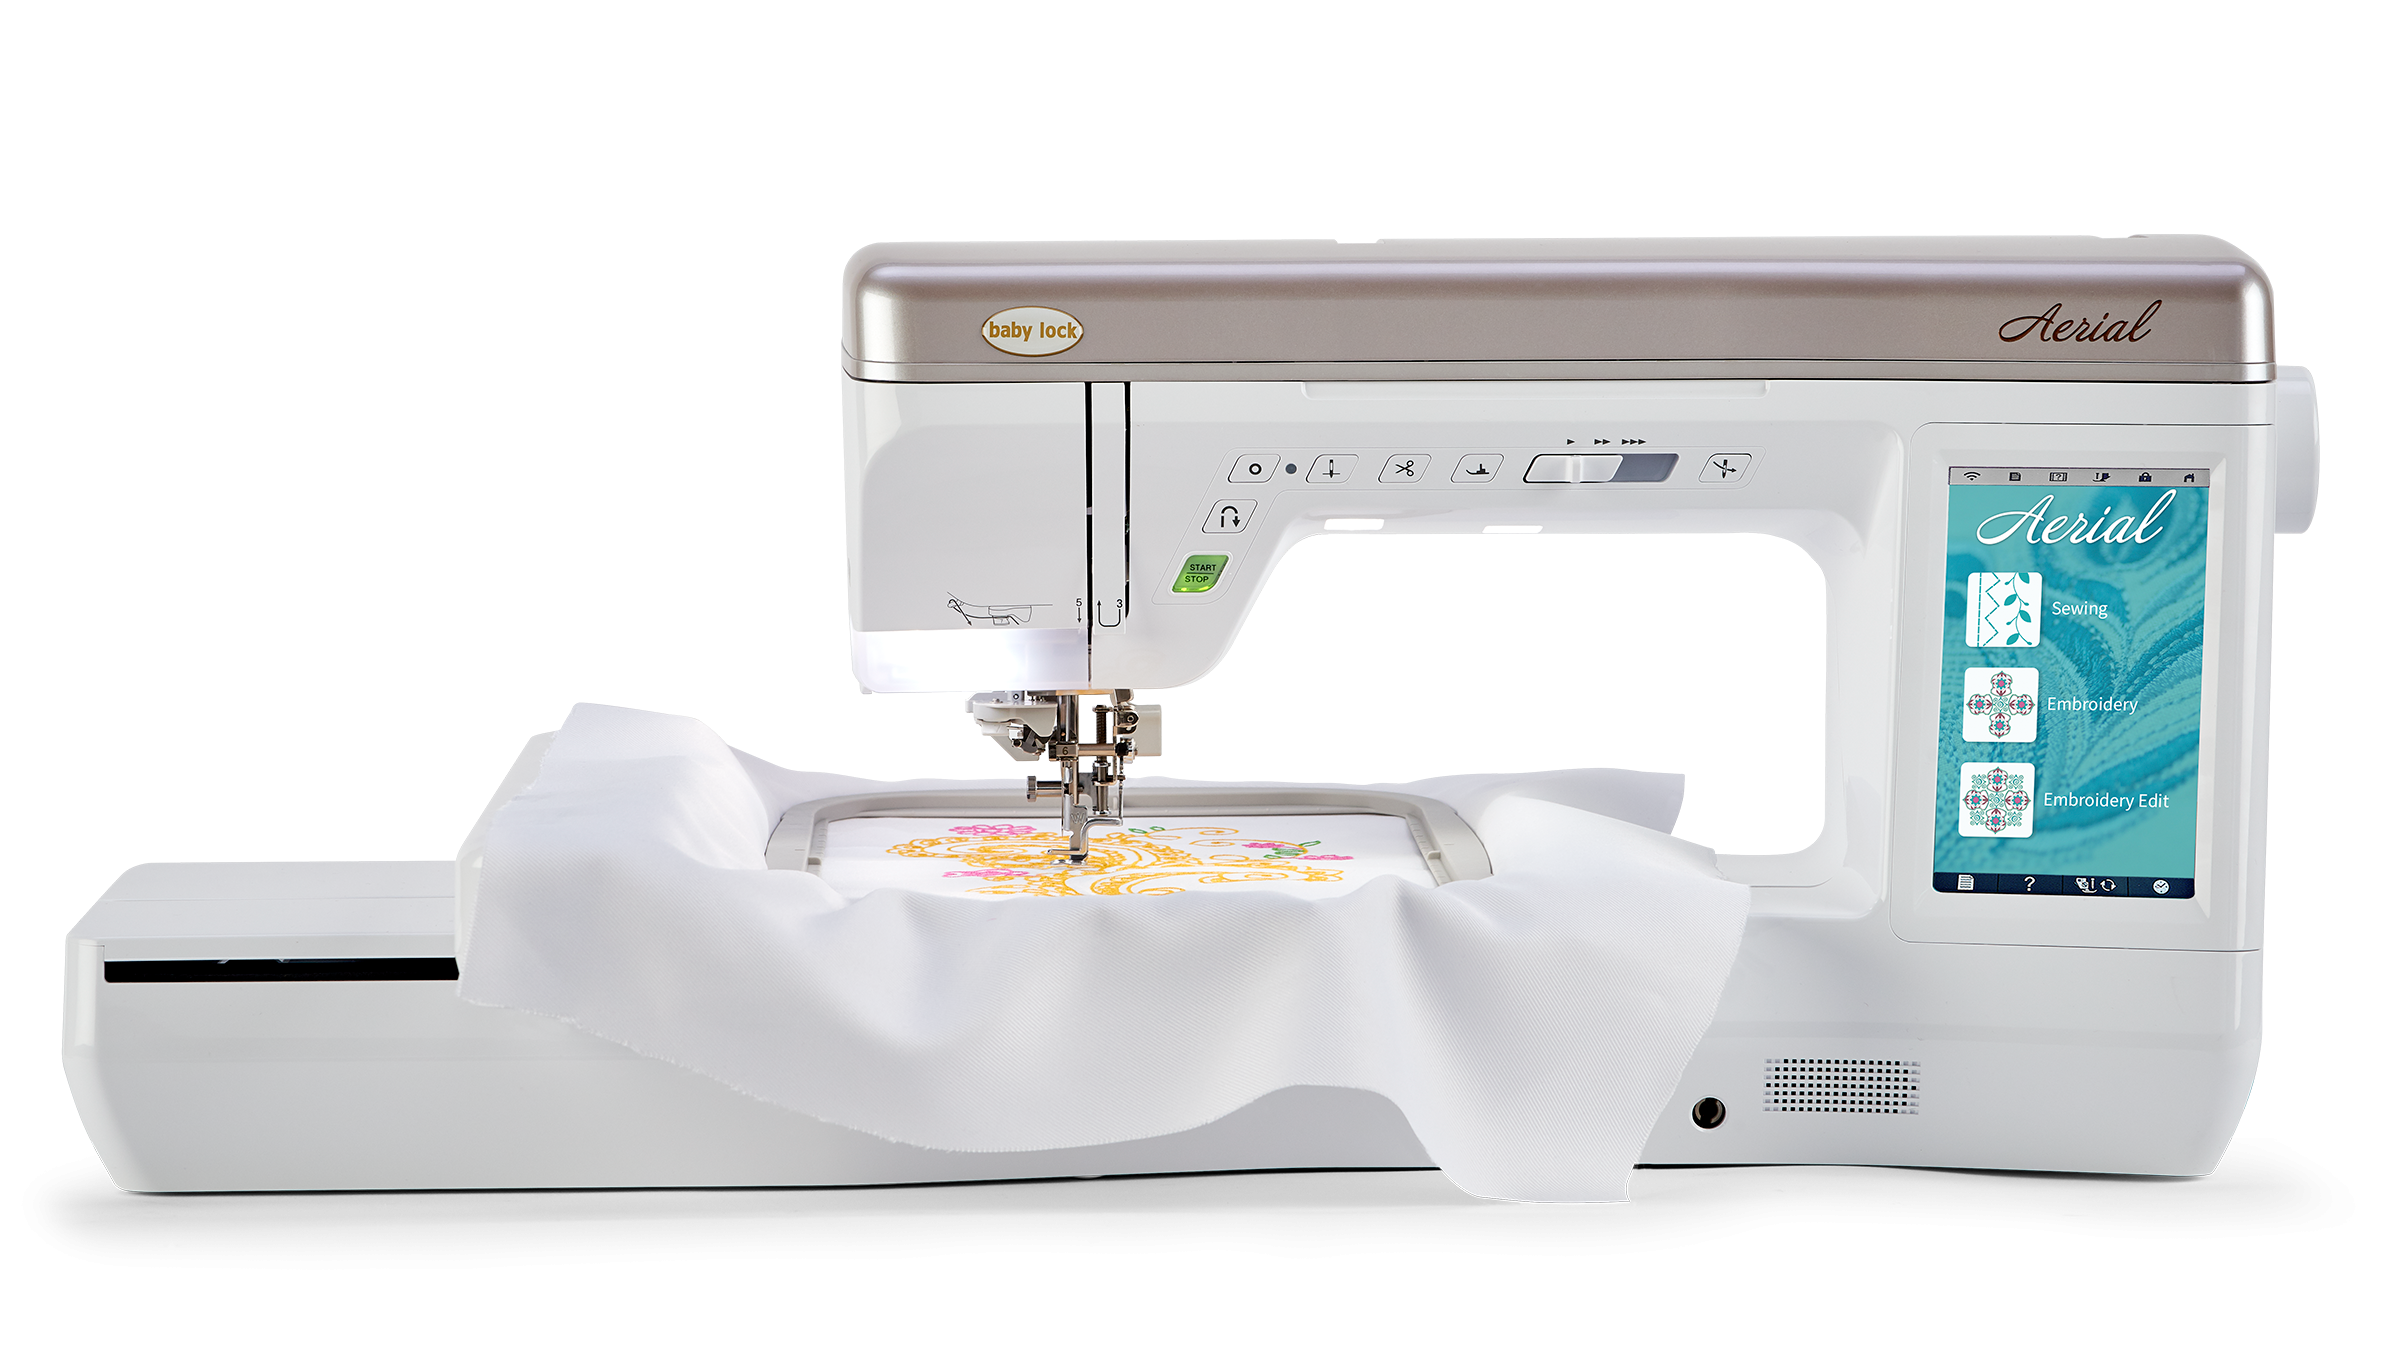 Baby Lock Aerial Embroidery Machine